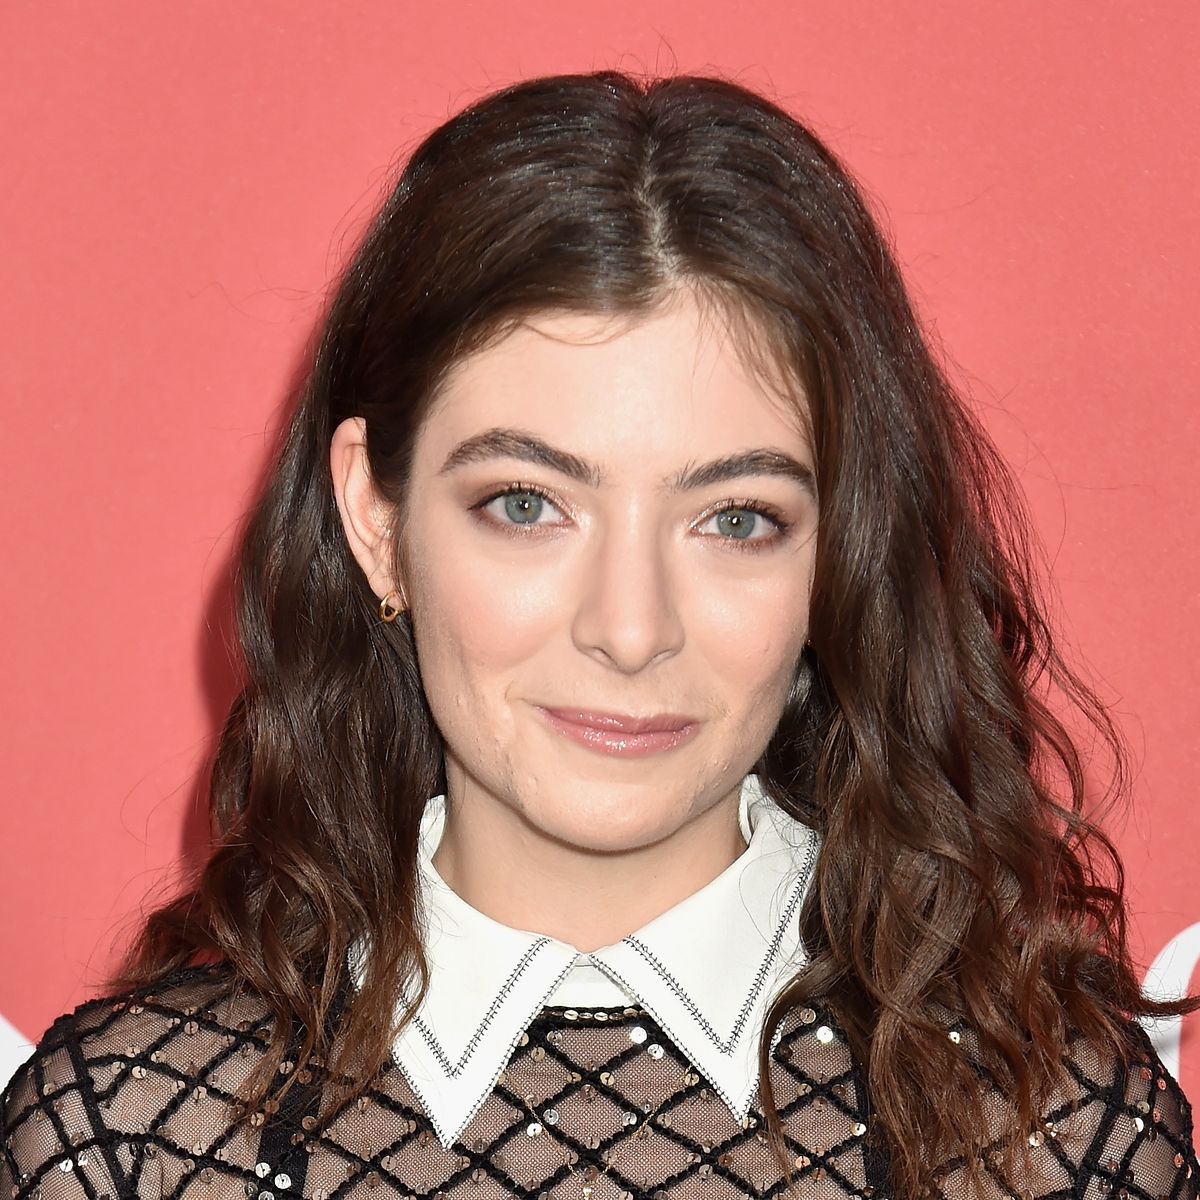 lorde New Zealand Singer Song Writer